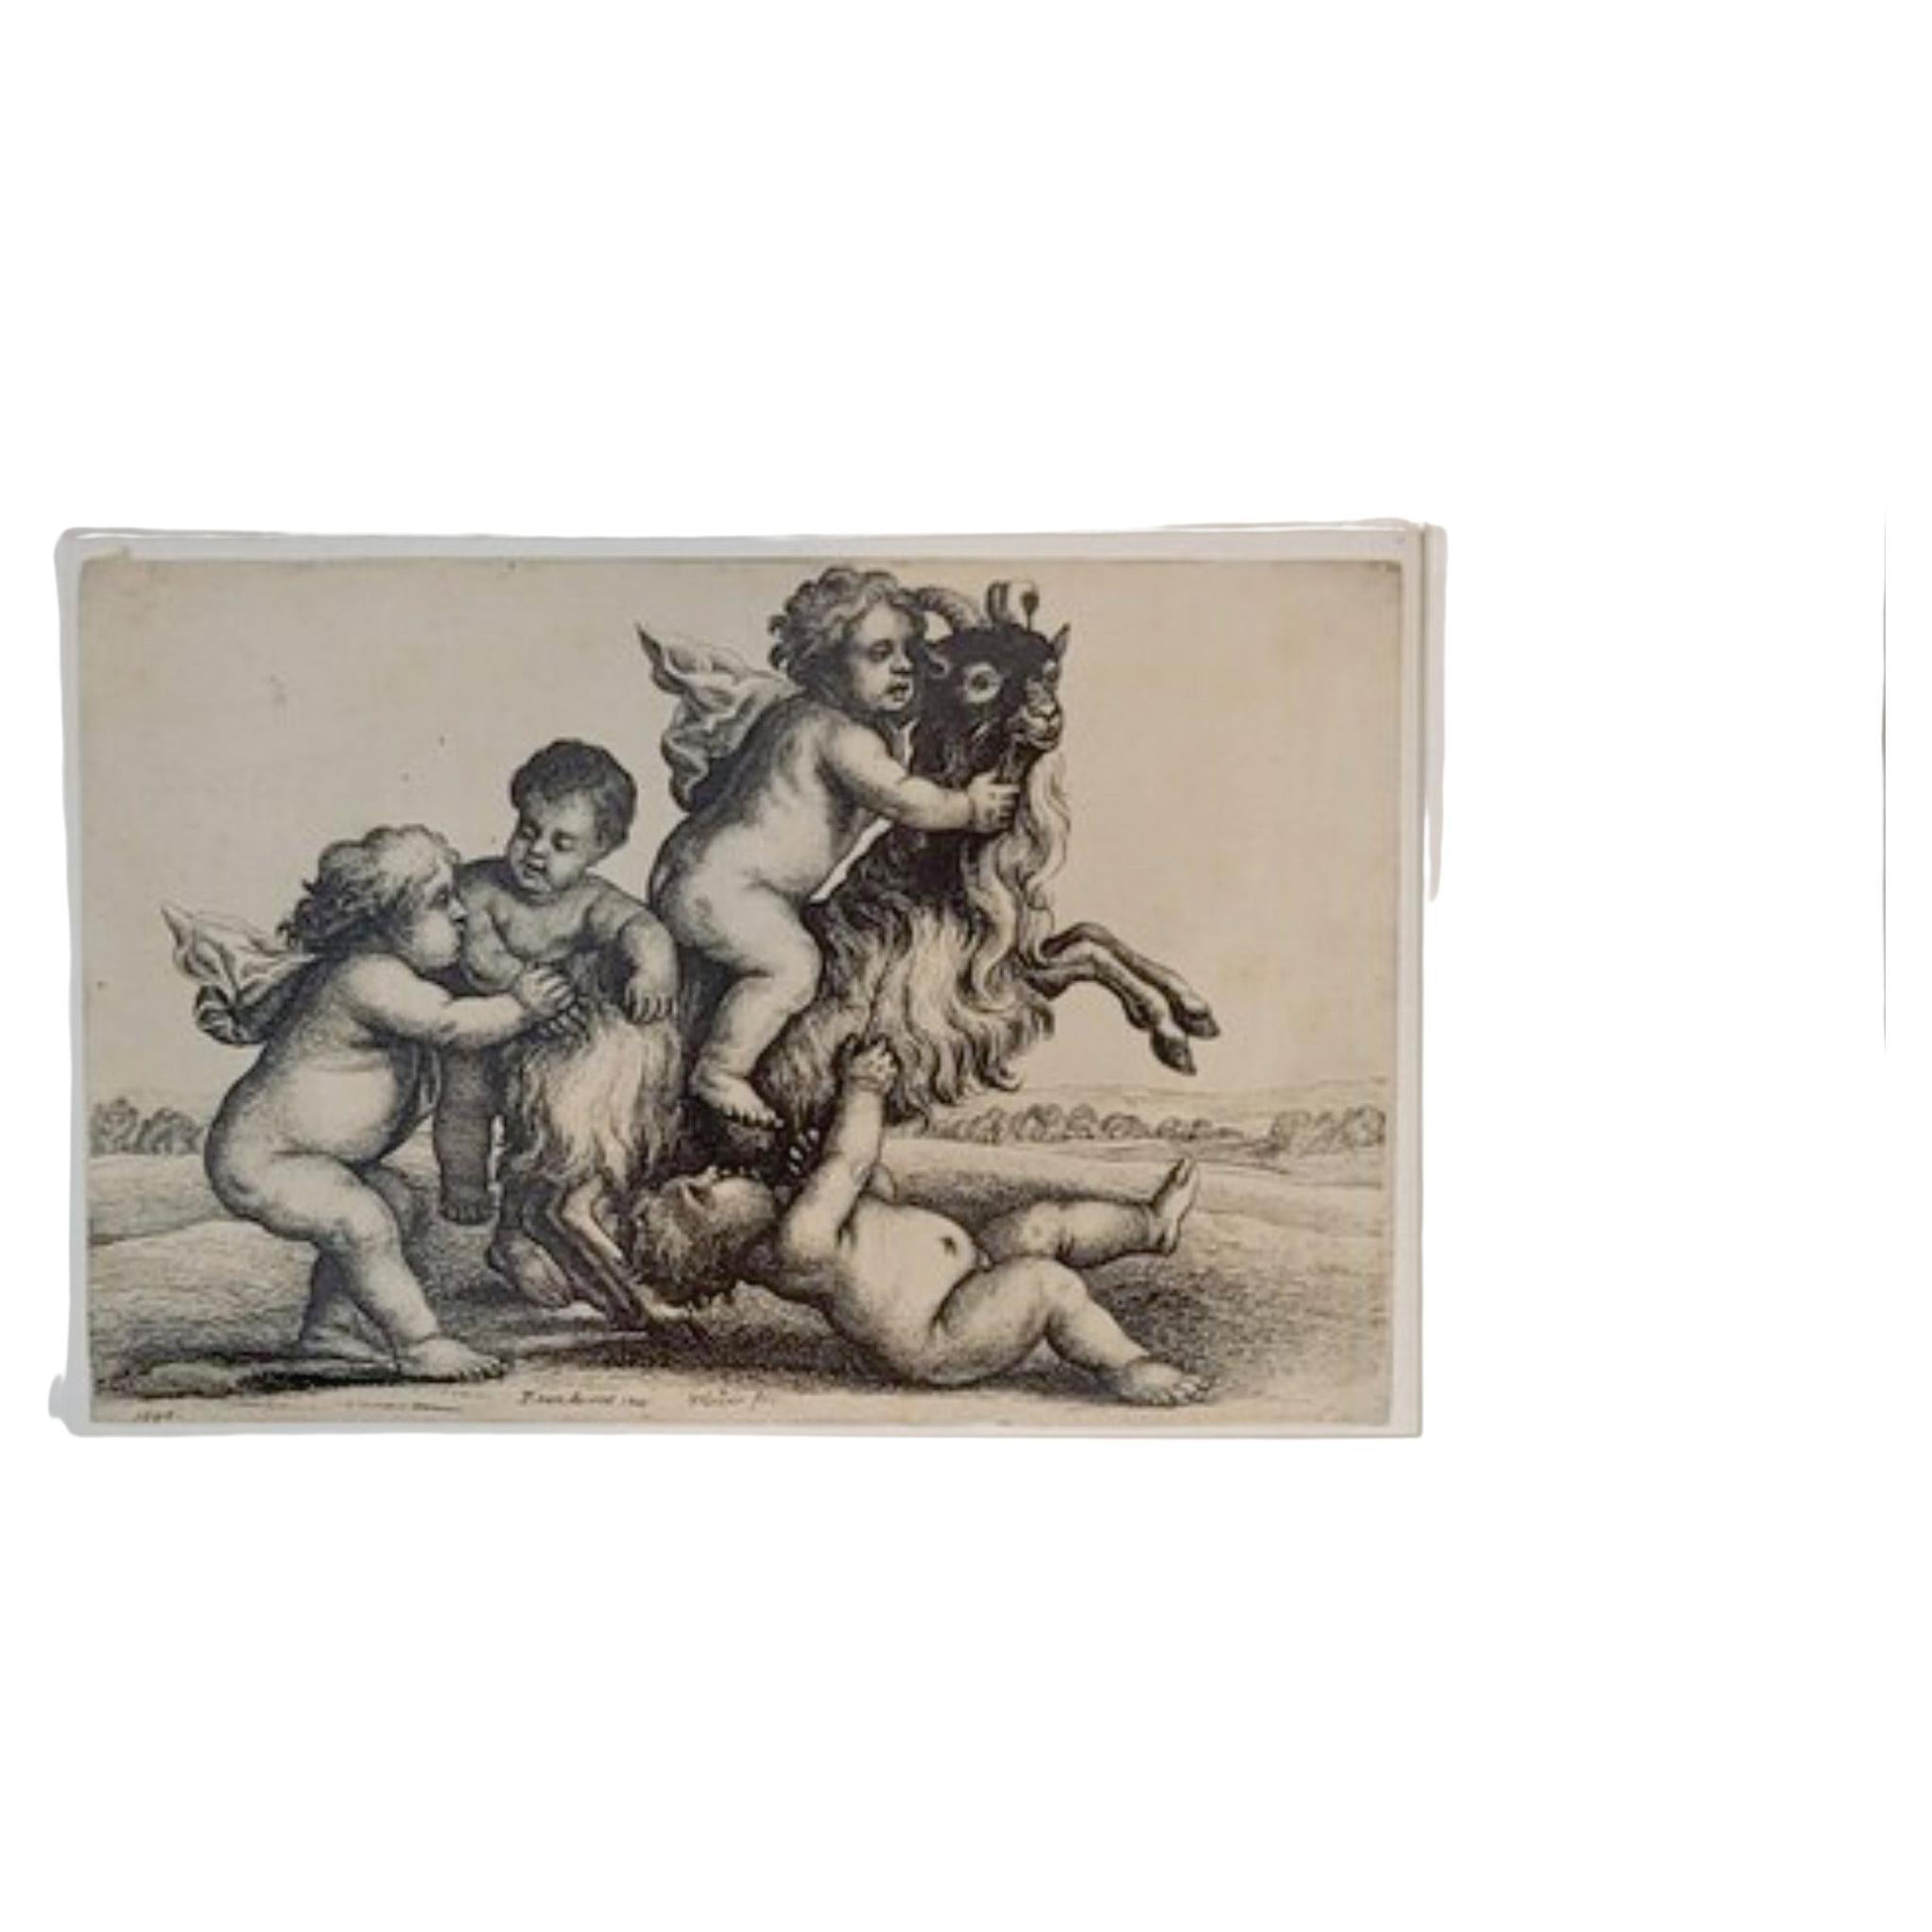 Wenceslaus Hollar lifetime etching on laid paper of "Putti with Goat" 1607-1677 For Sale